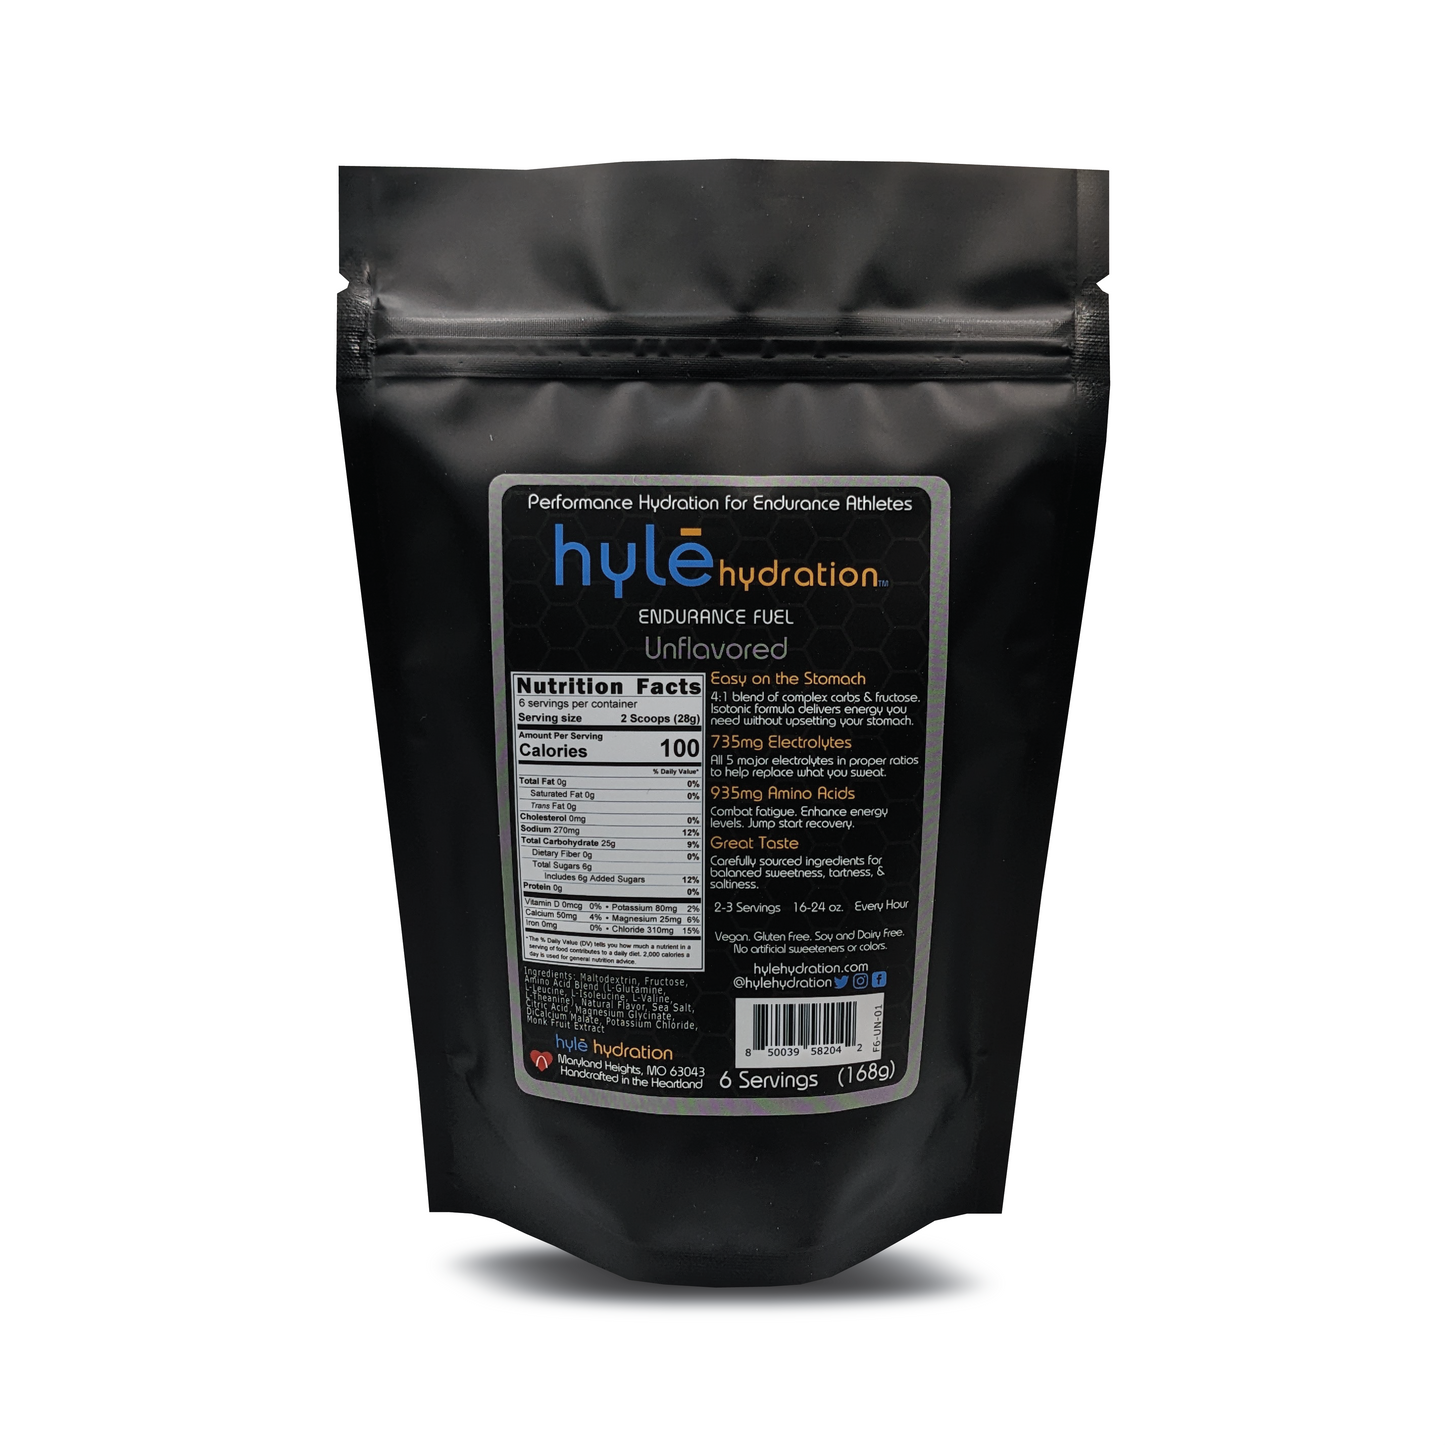 6 serving bag of hyle hydration endurance fuel unflavored. Hyle Hydration Endurance Fuel is a powdered sports drink mix with carbohydrates, electrolytes, and amino acids.